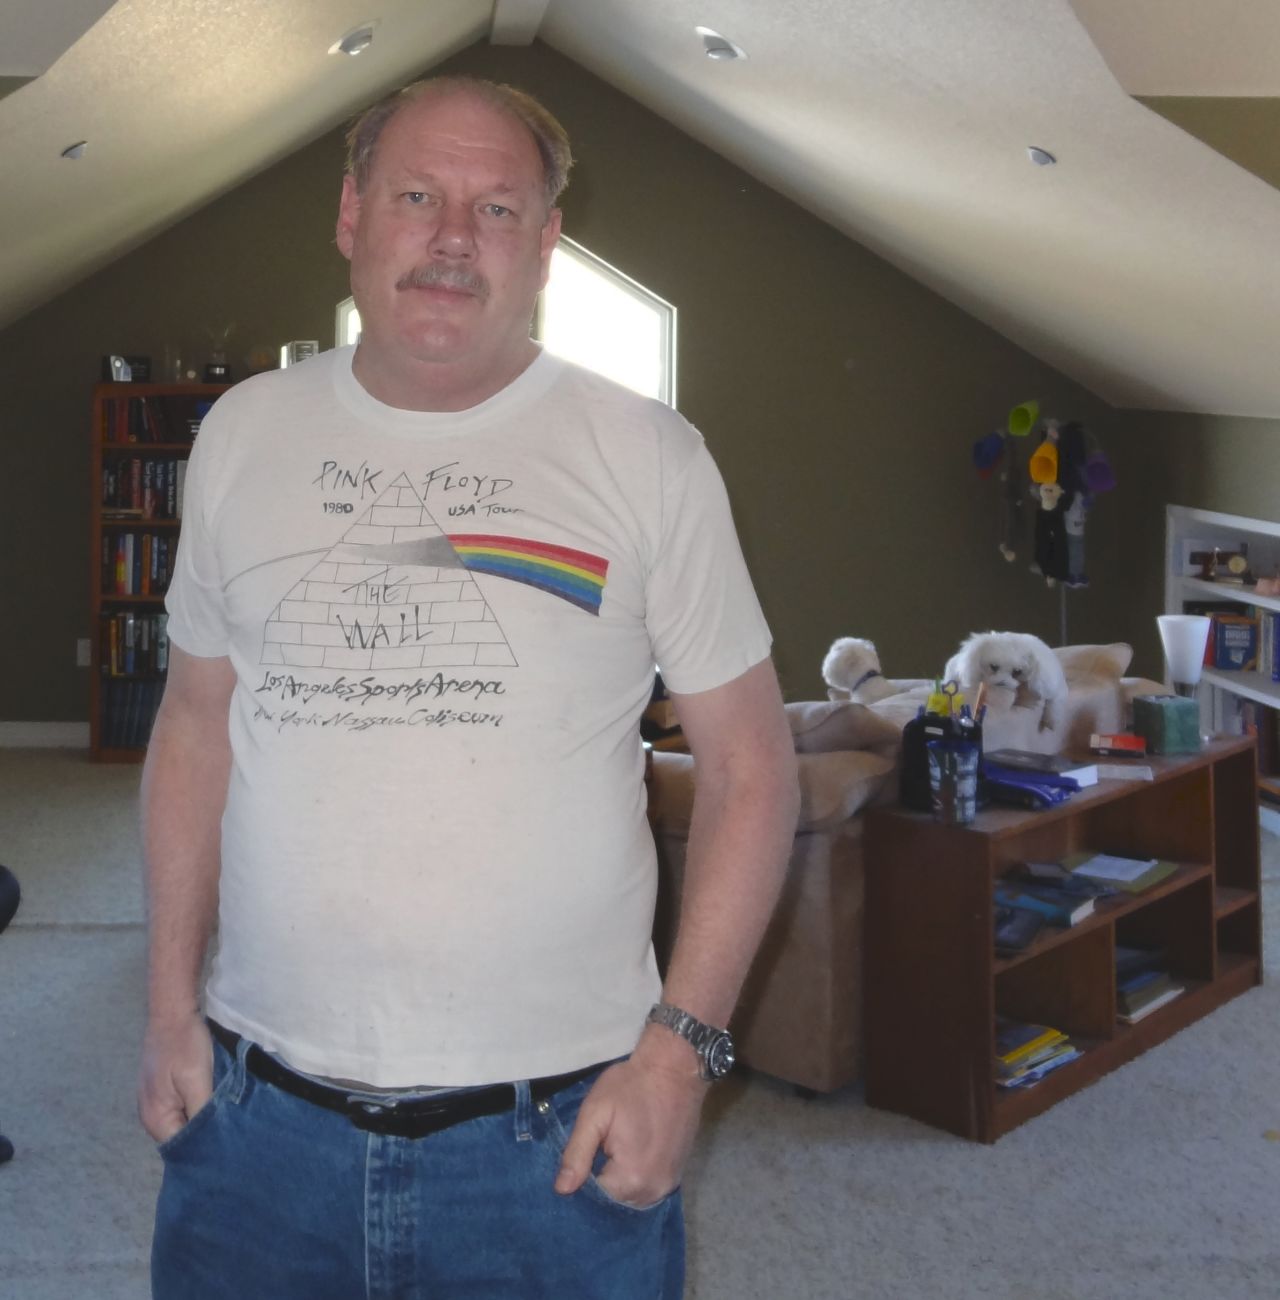 In 1980, <a href="http://ireport.cnn.com/docs/DOC-928482">Matthew Colver </a>went to a Pink Floyd concert where he bought this shirt from their Wall Tour. Decades later, he still wears it occasionally. "The T-shirt to me says that I may be old, but still like rock concerts," he said.